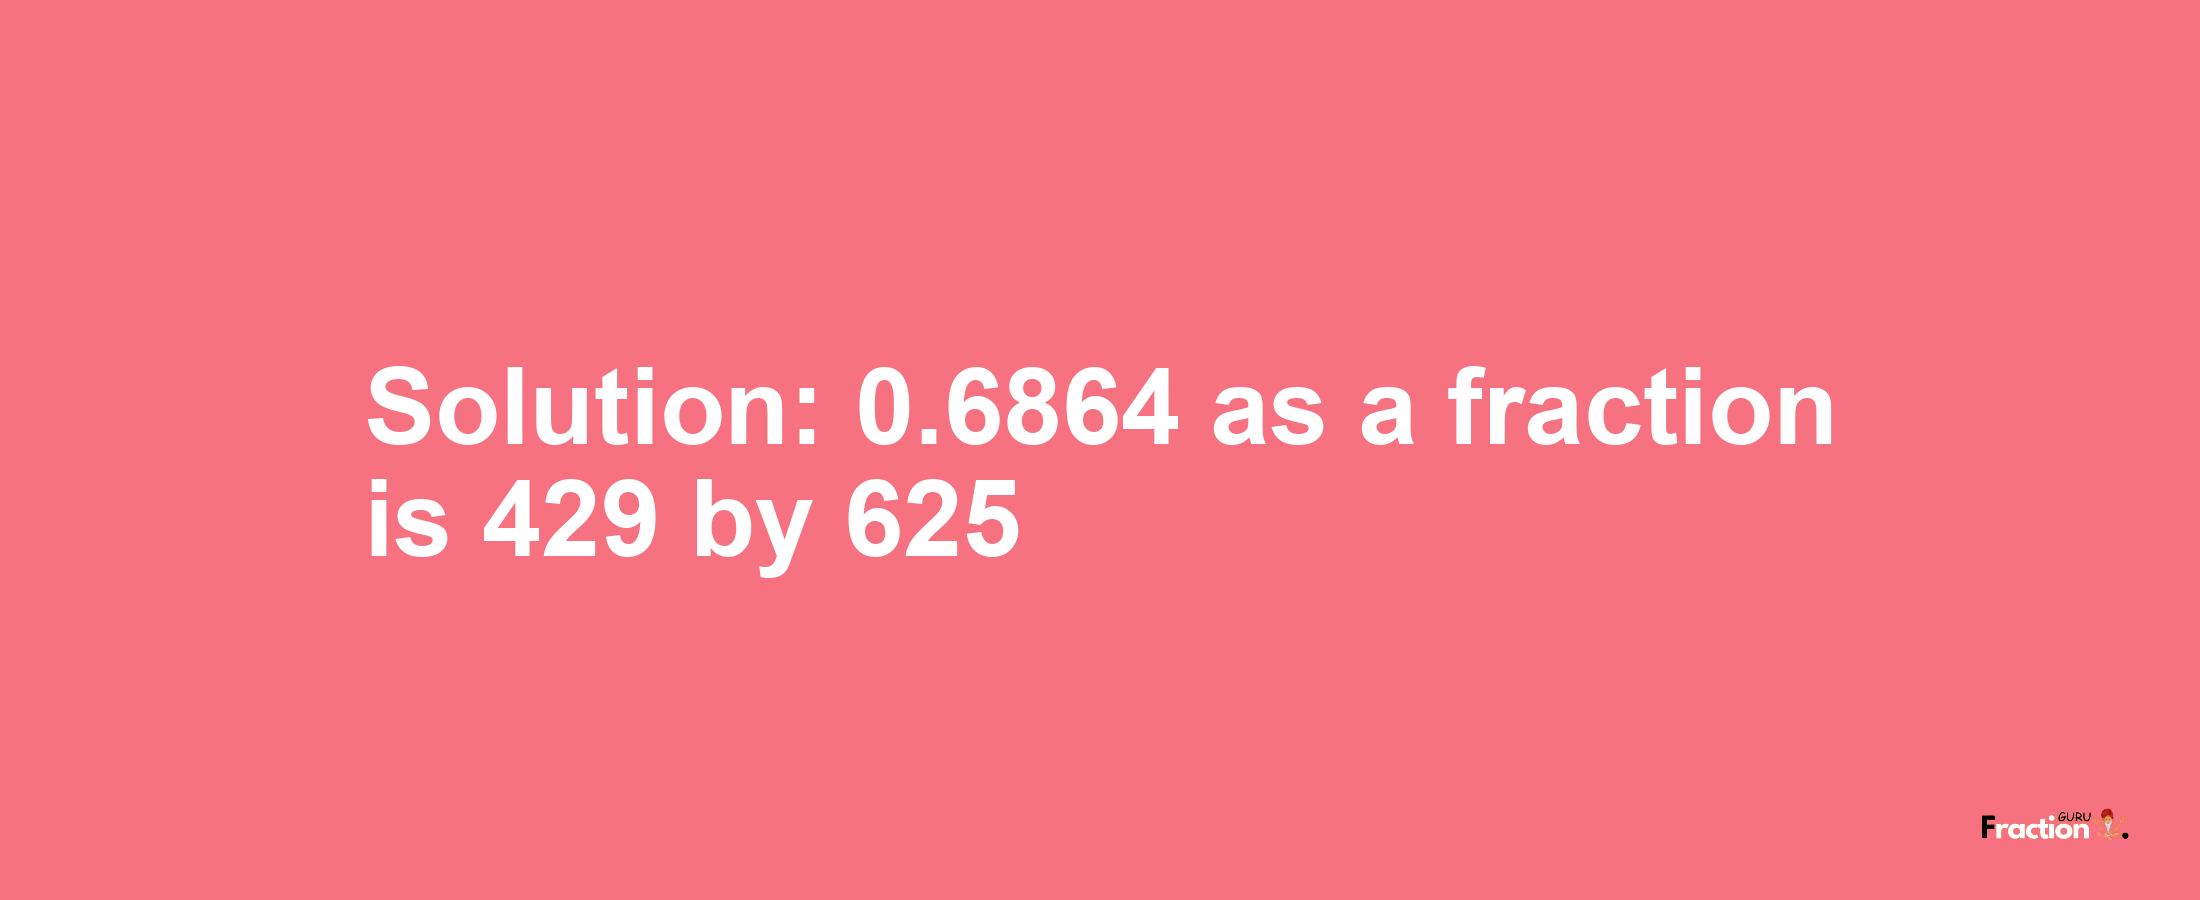 Solution:0.6864 as a fraction is 429/625